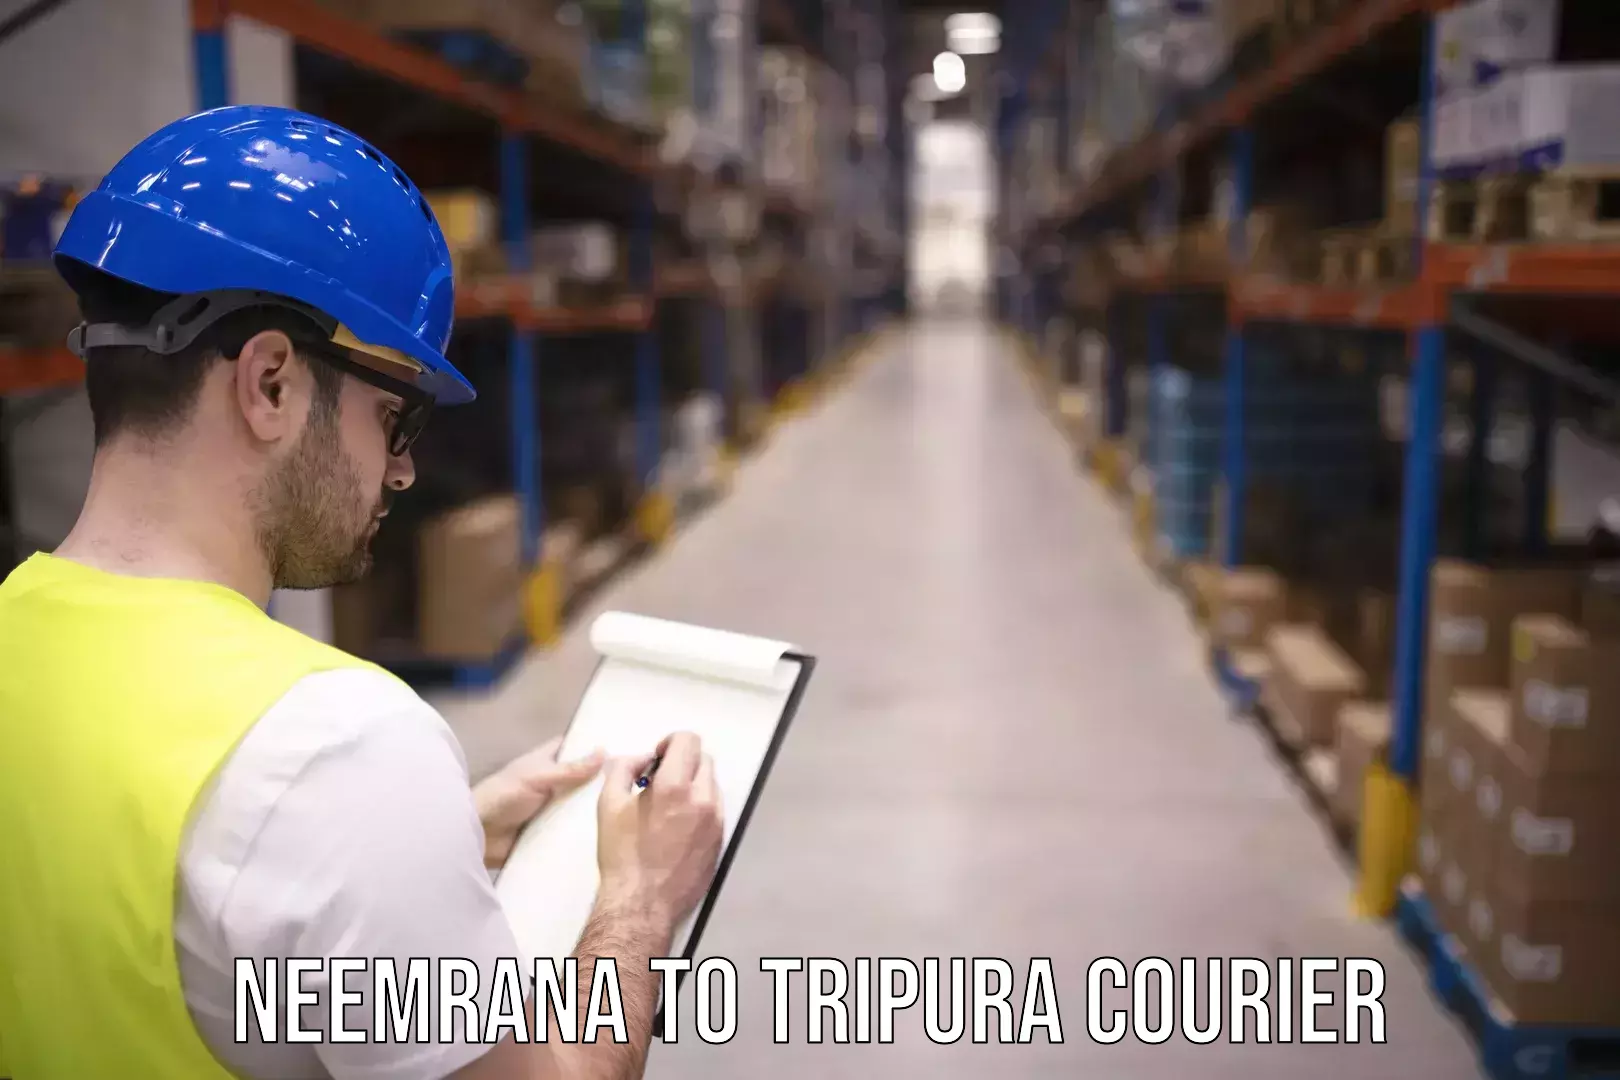 State-of-the-art courier technology Neemrana to Udaipur Tripura